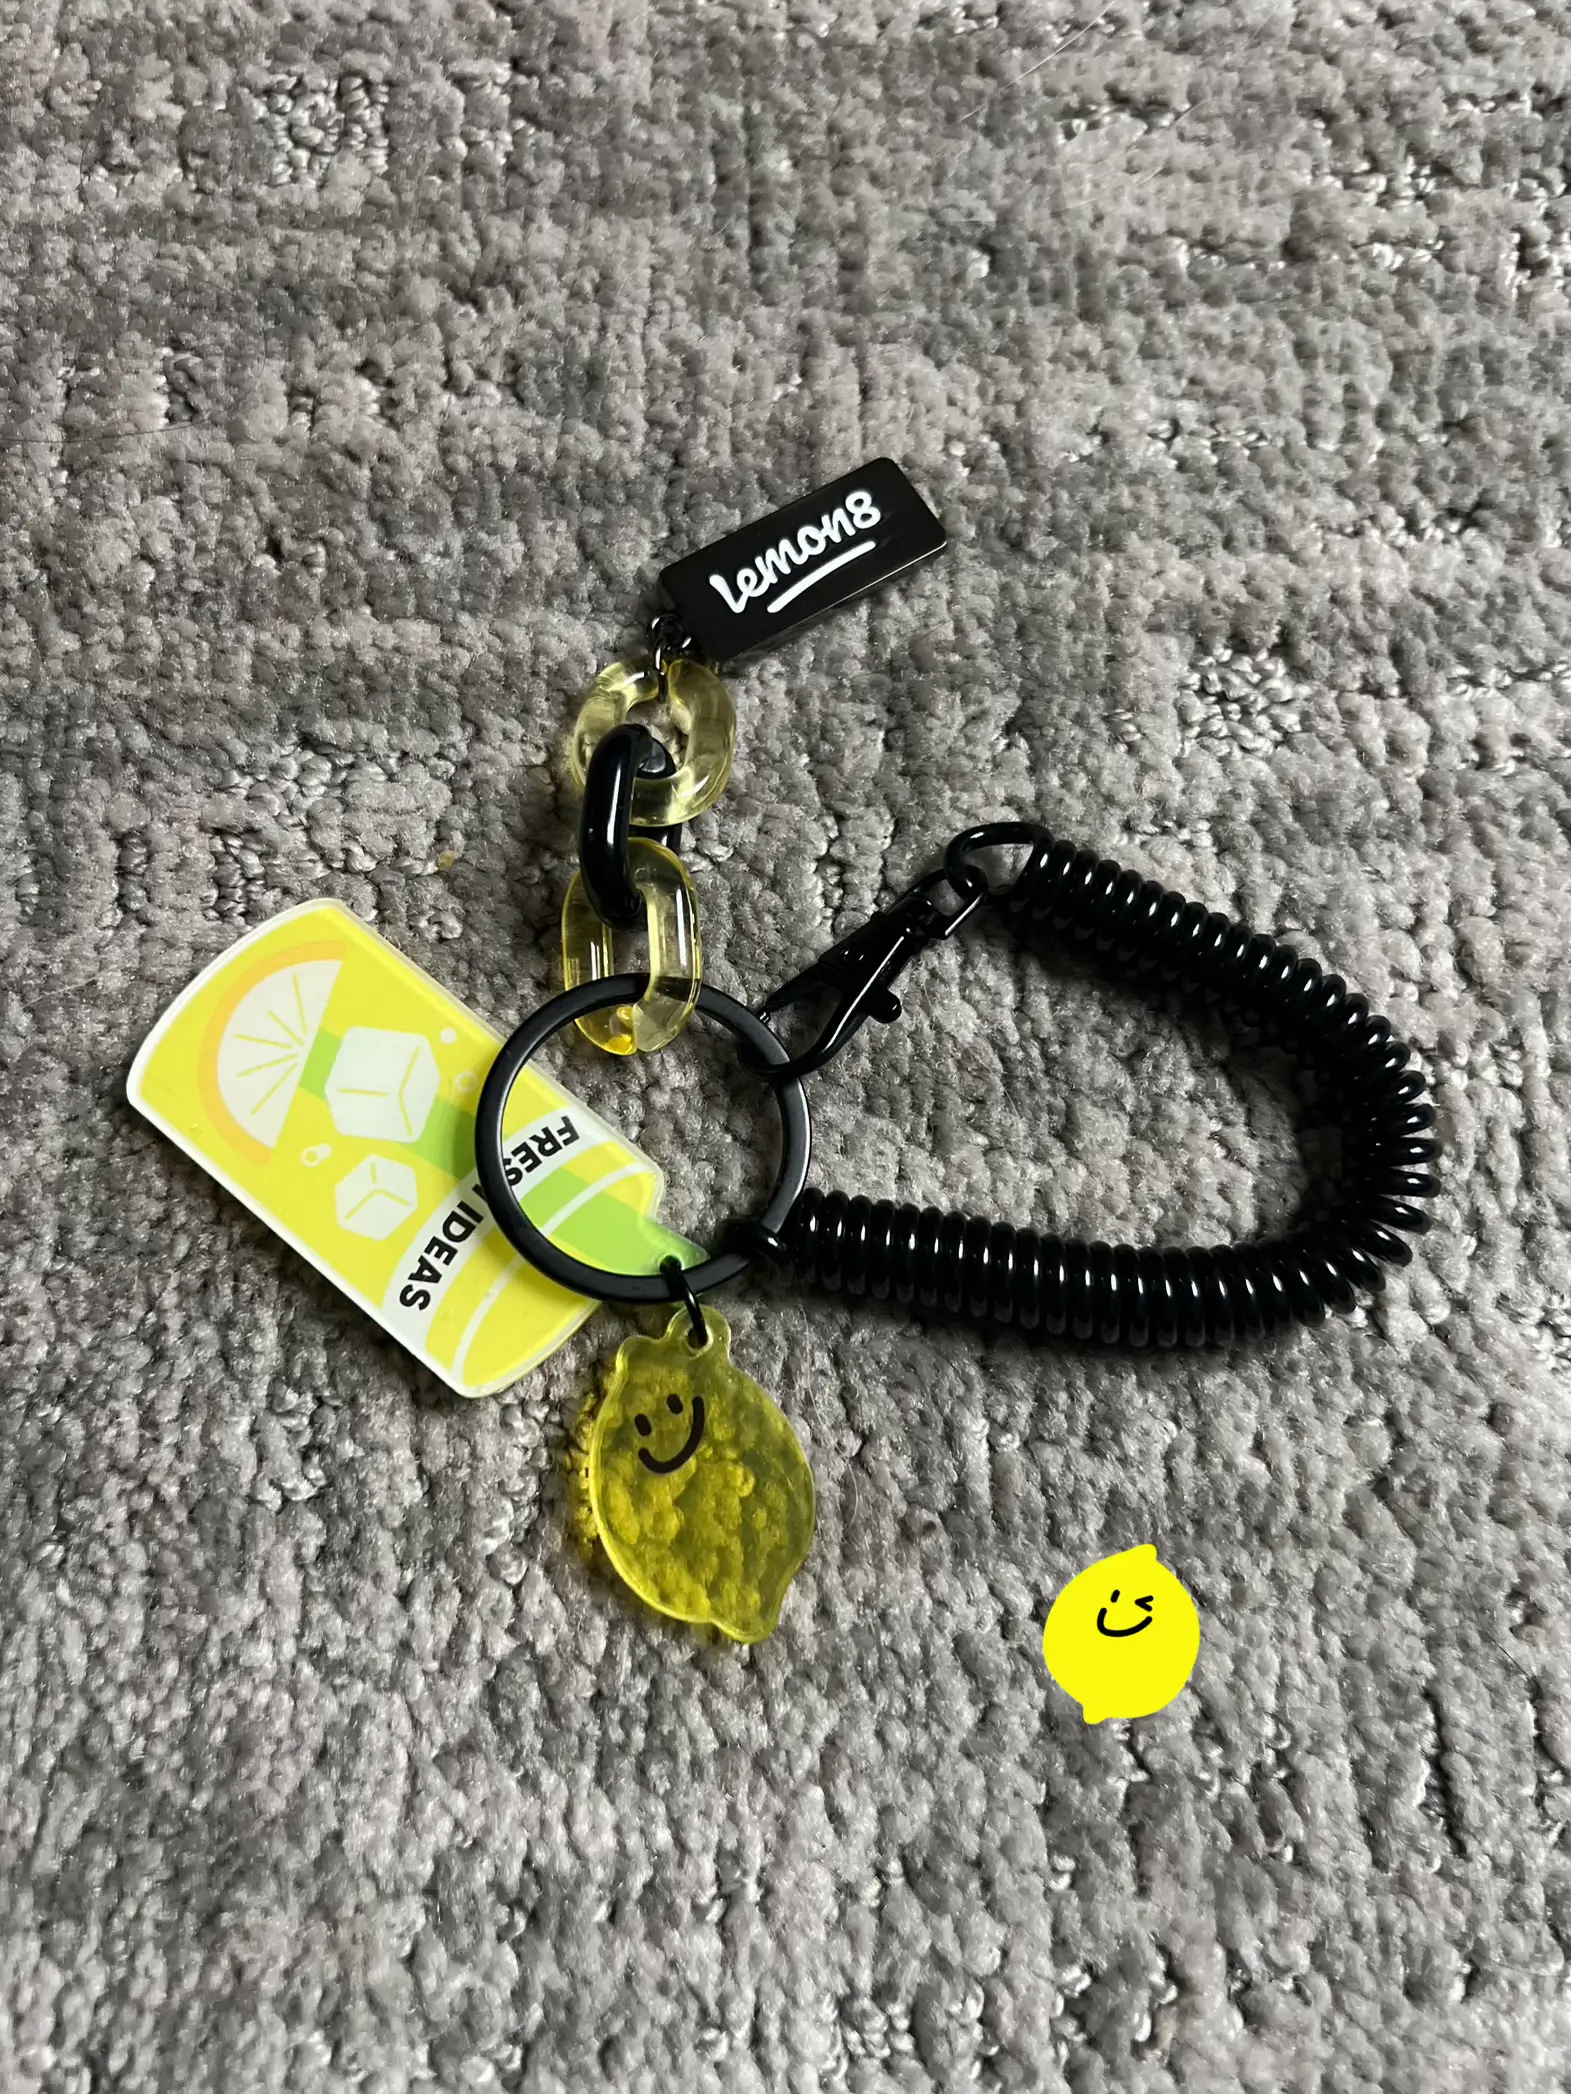  A keychain with a lemon on it and a smiley face.